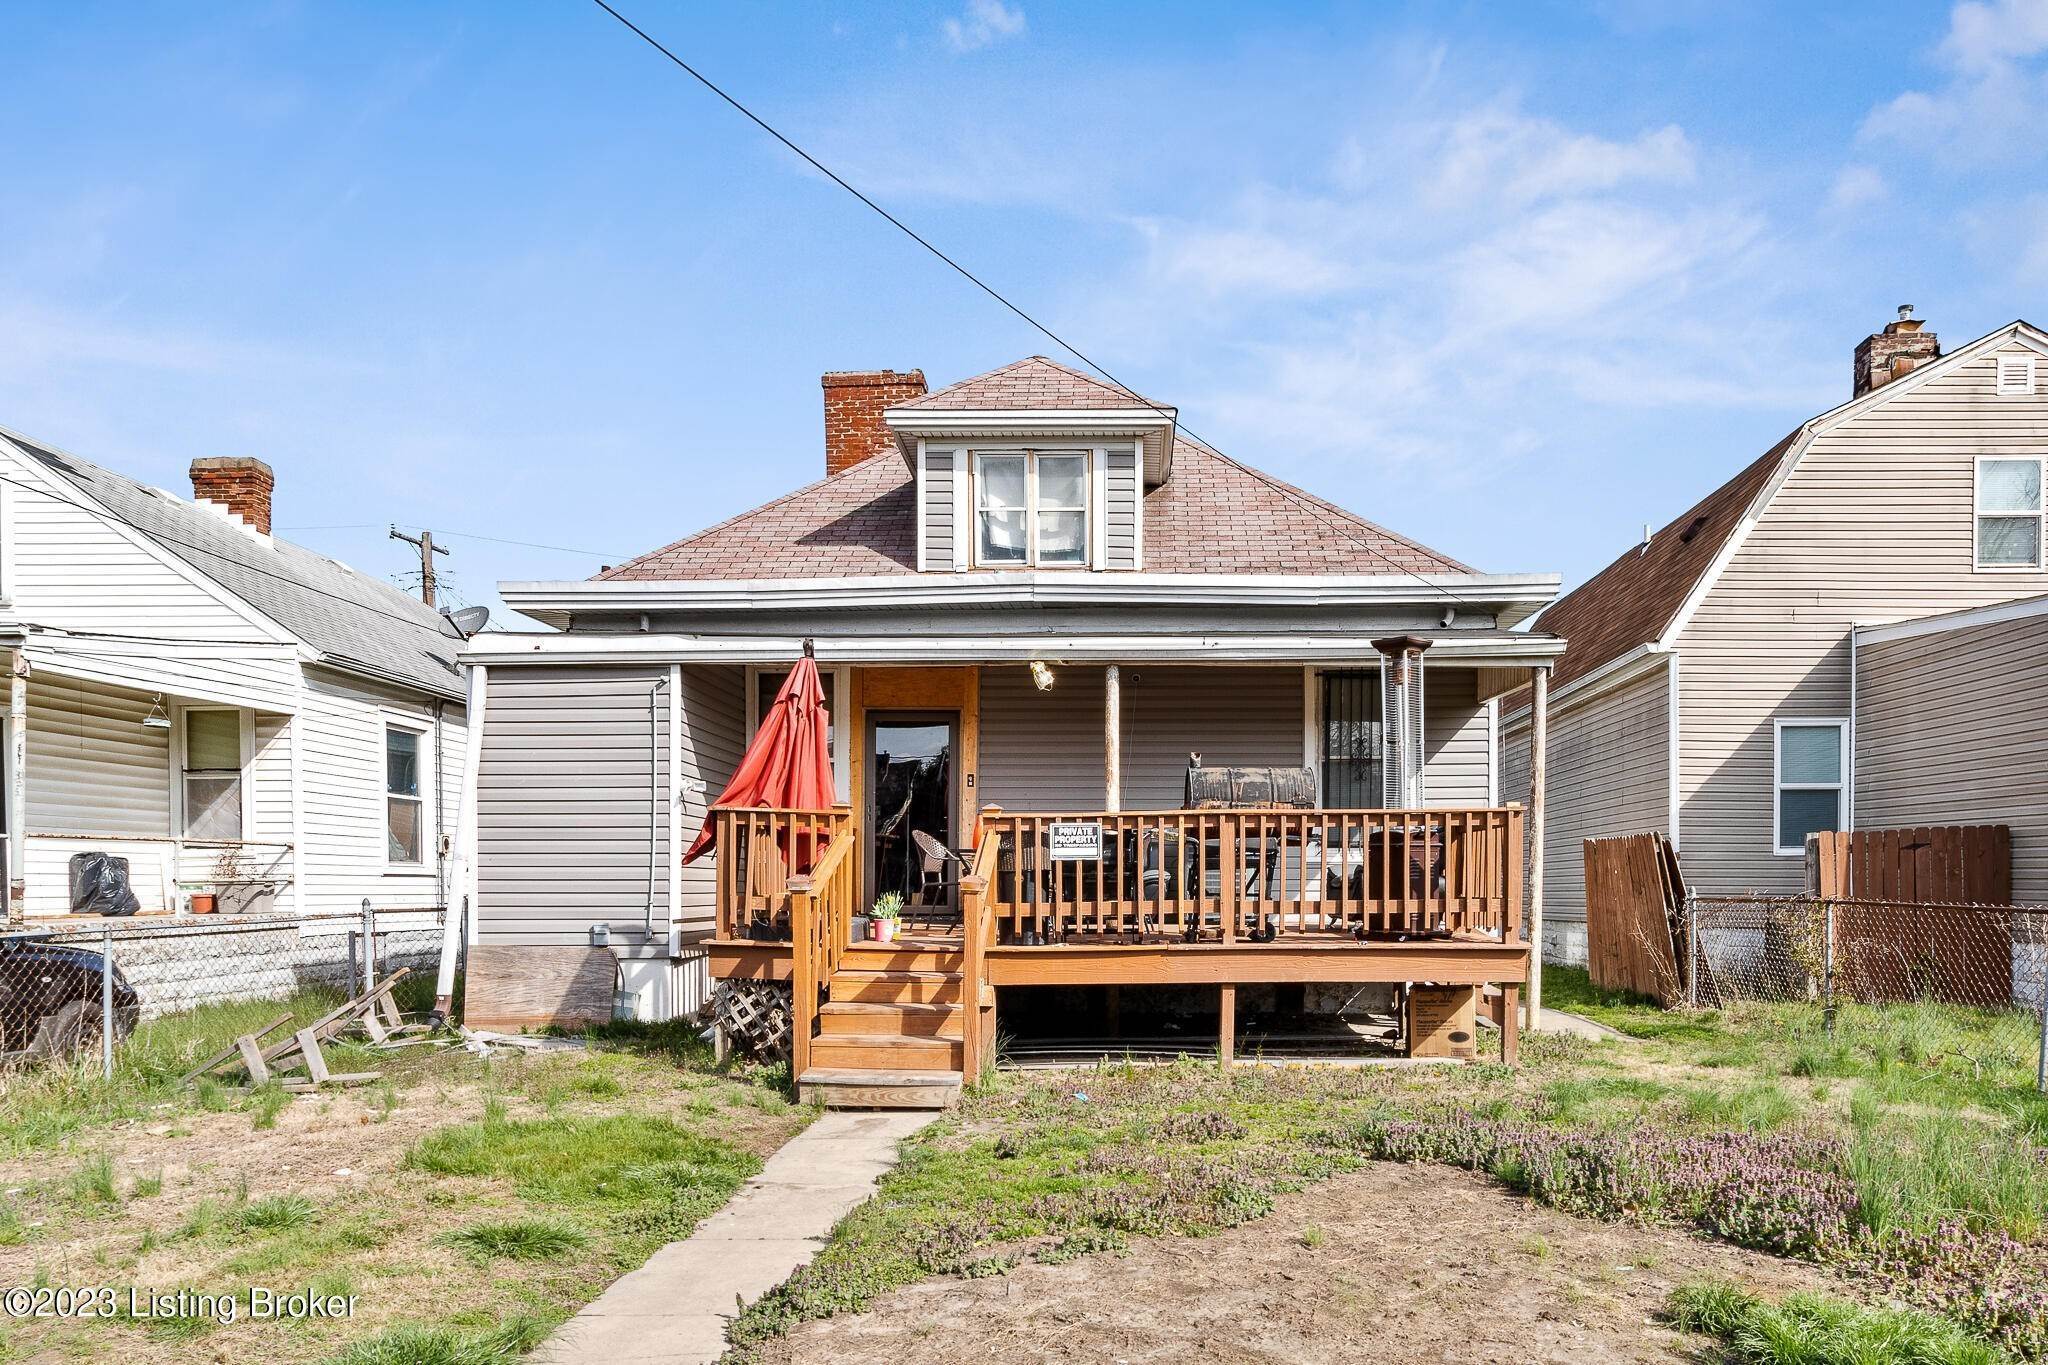 23. Single Family at Louisville, KY 40210